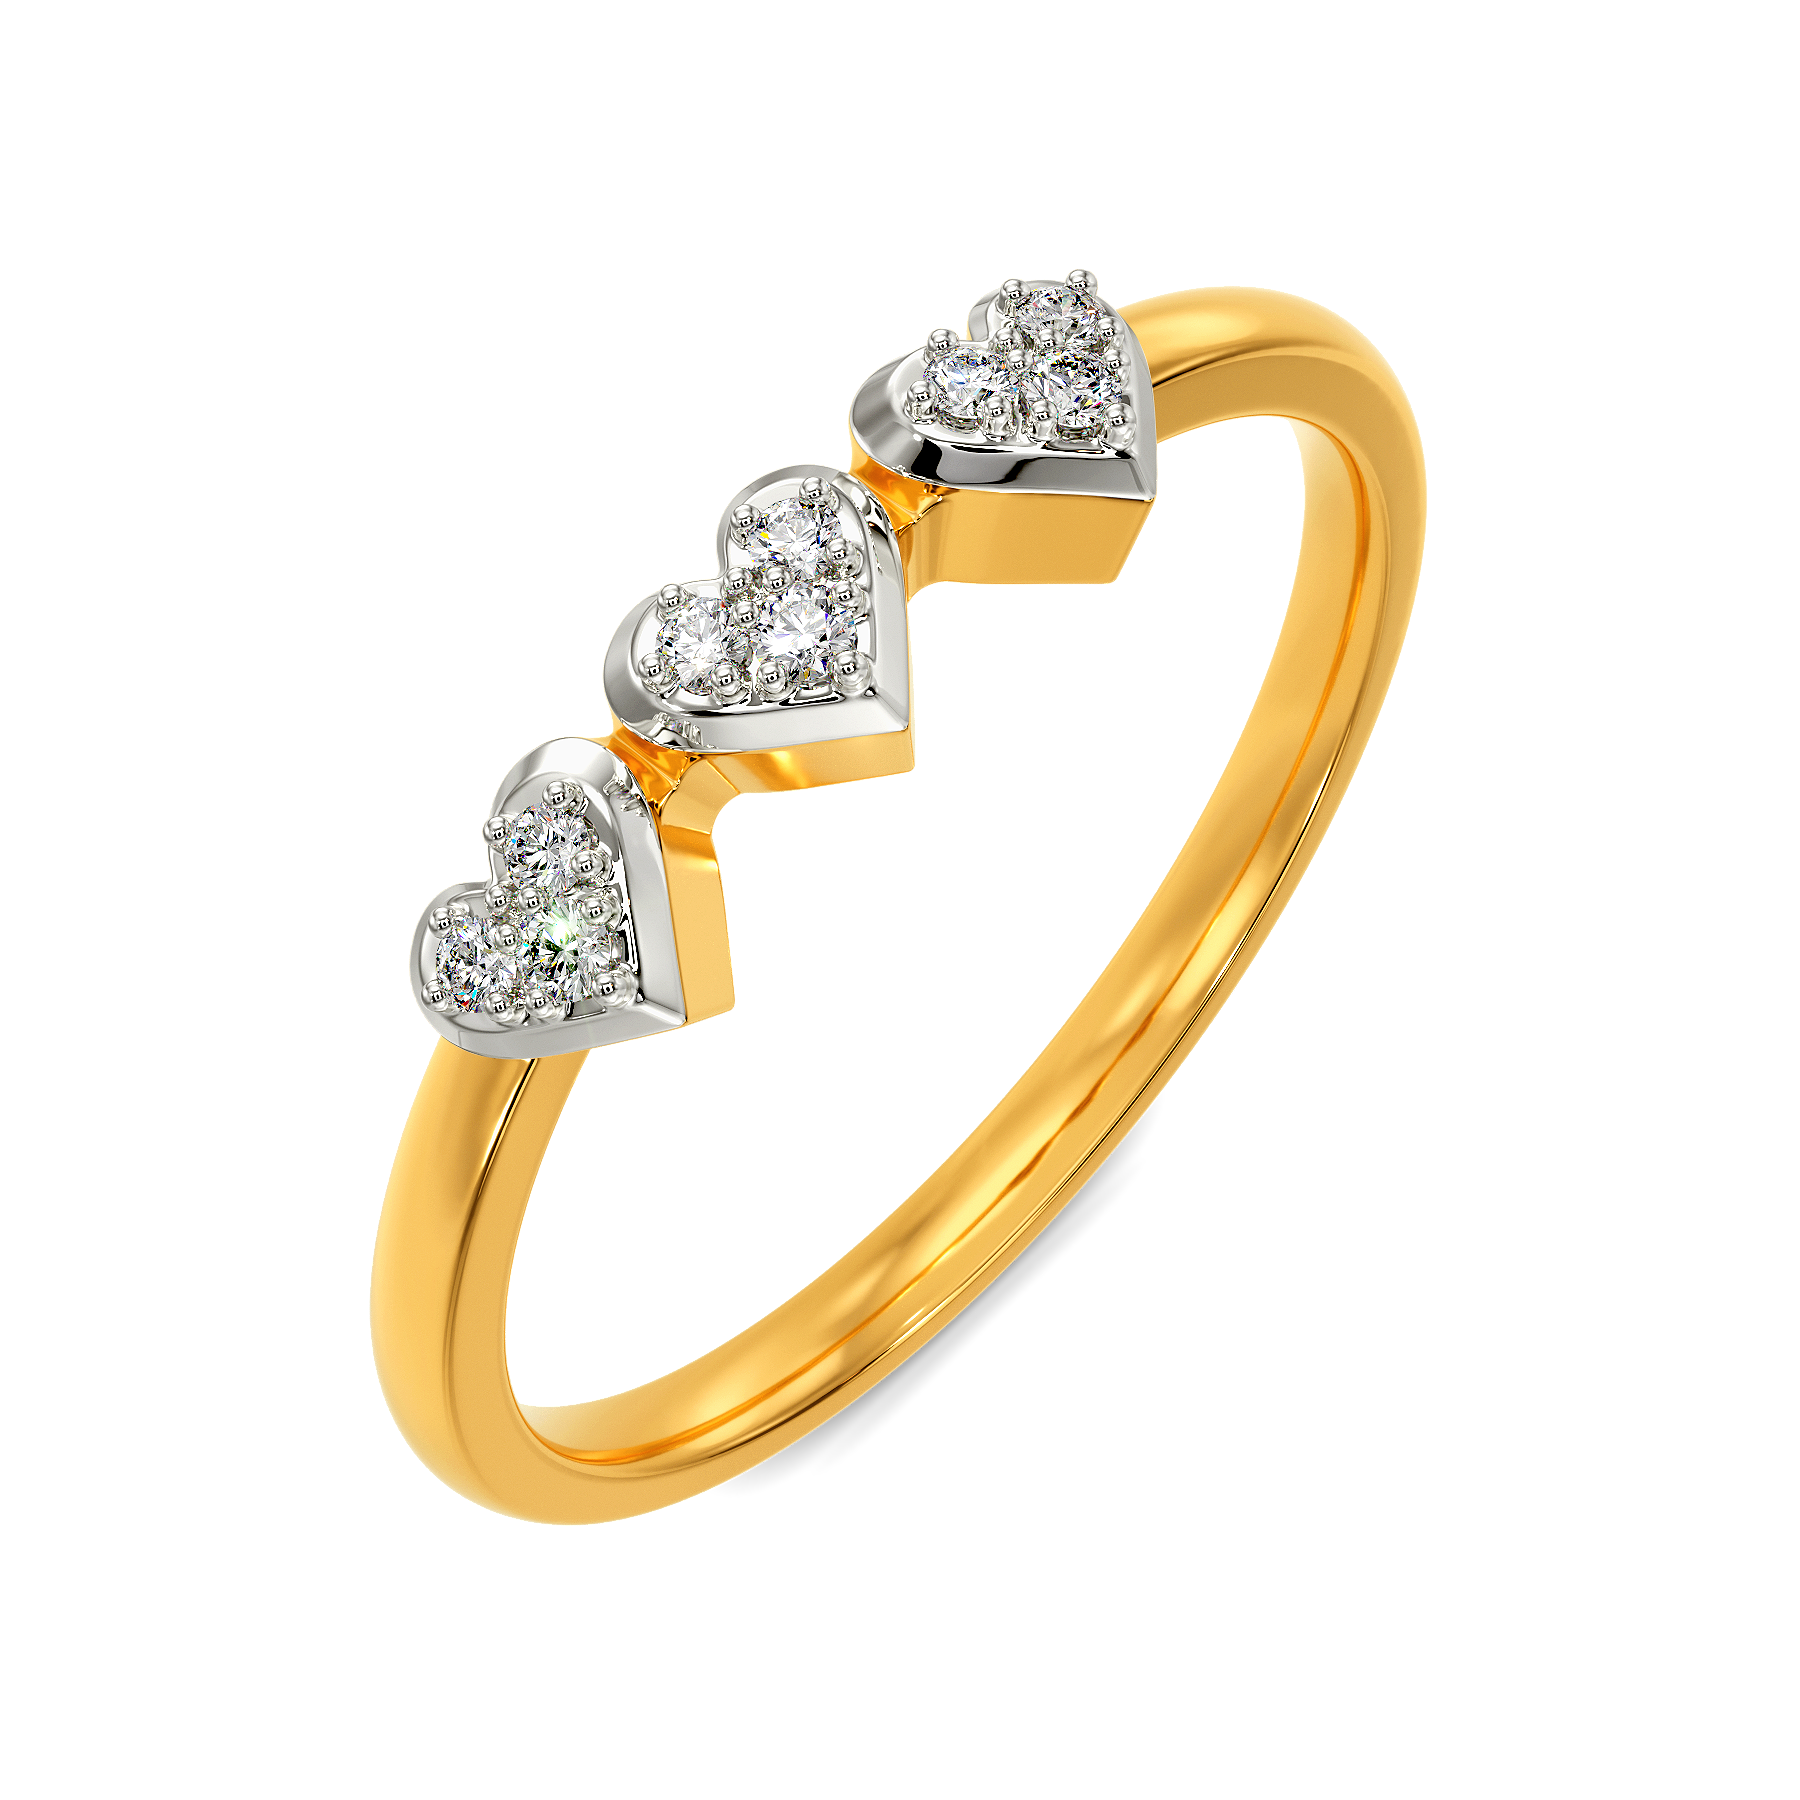 22k Ring Solid Gold Ring Ladies Jewelry Modern Heart Shape With Stone R46 |  Royal Dubai Jewellers